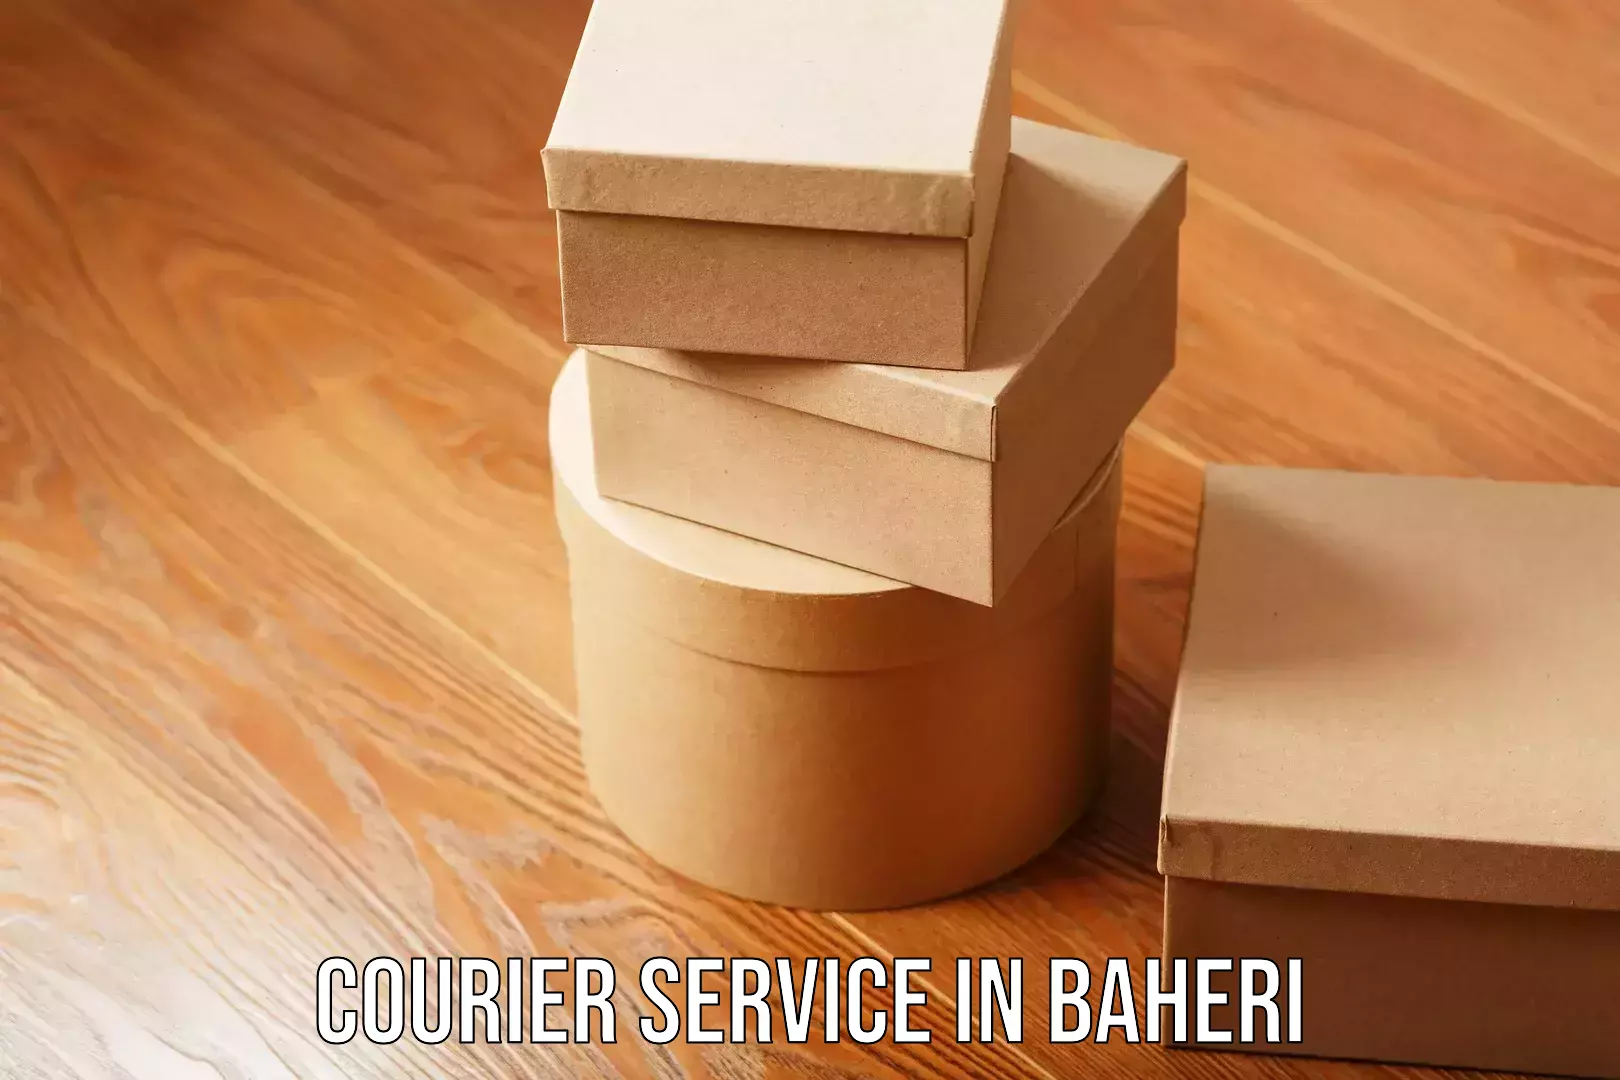 Personalized courier experiences in Baheri